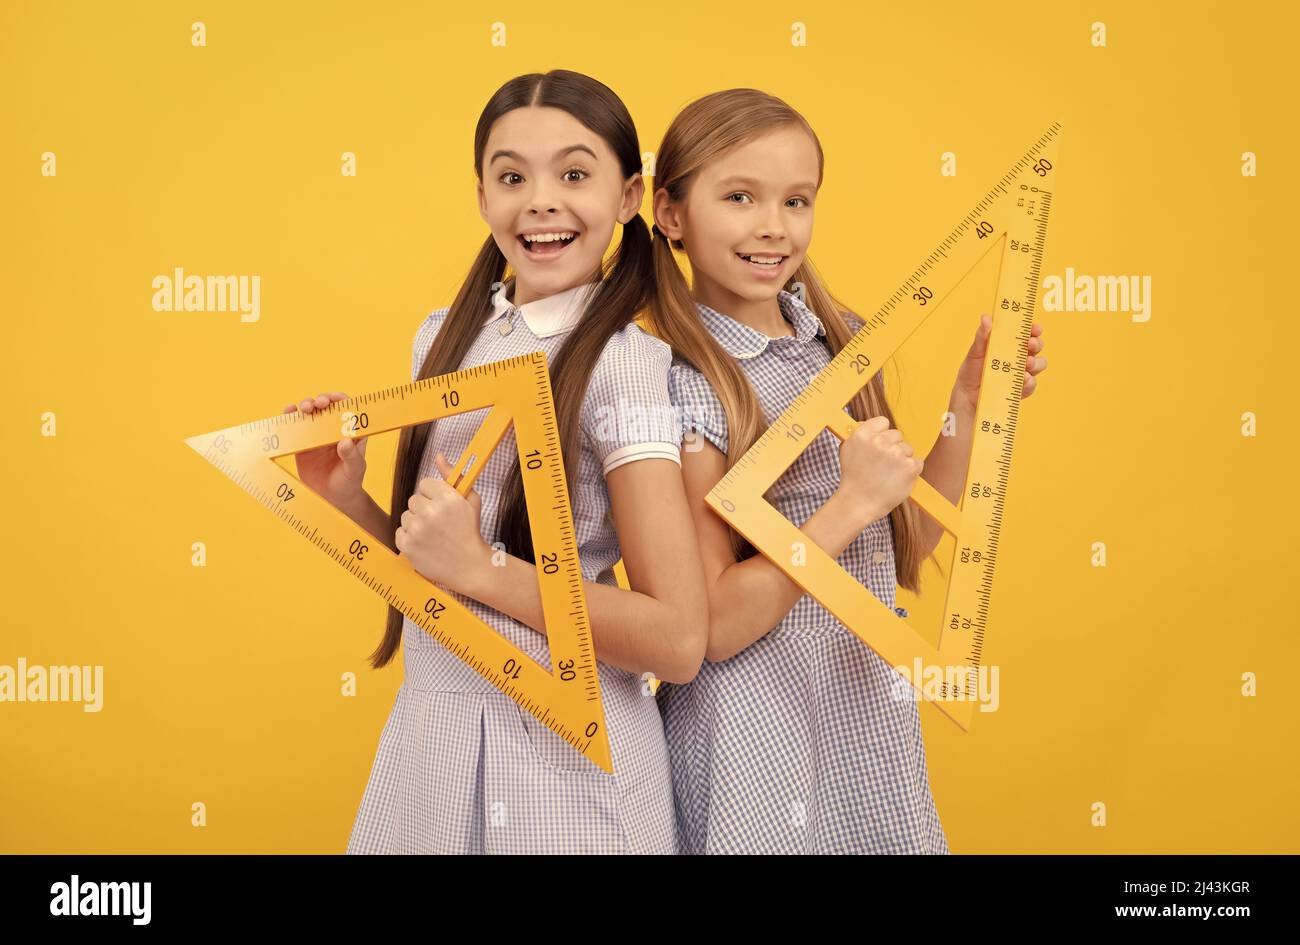 Education for all children. Happy teen girls hold triangular rulers. School education. Geometry lesson Stock Photo